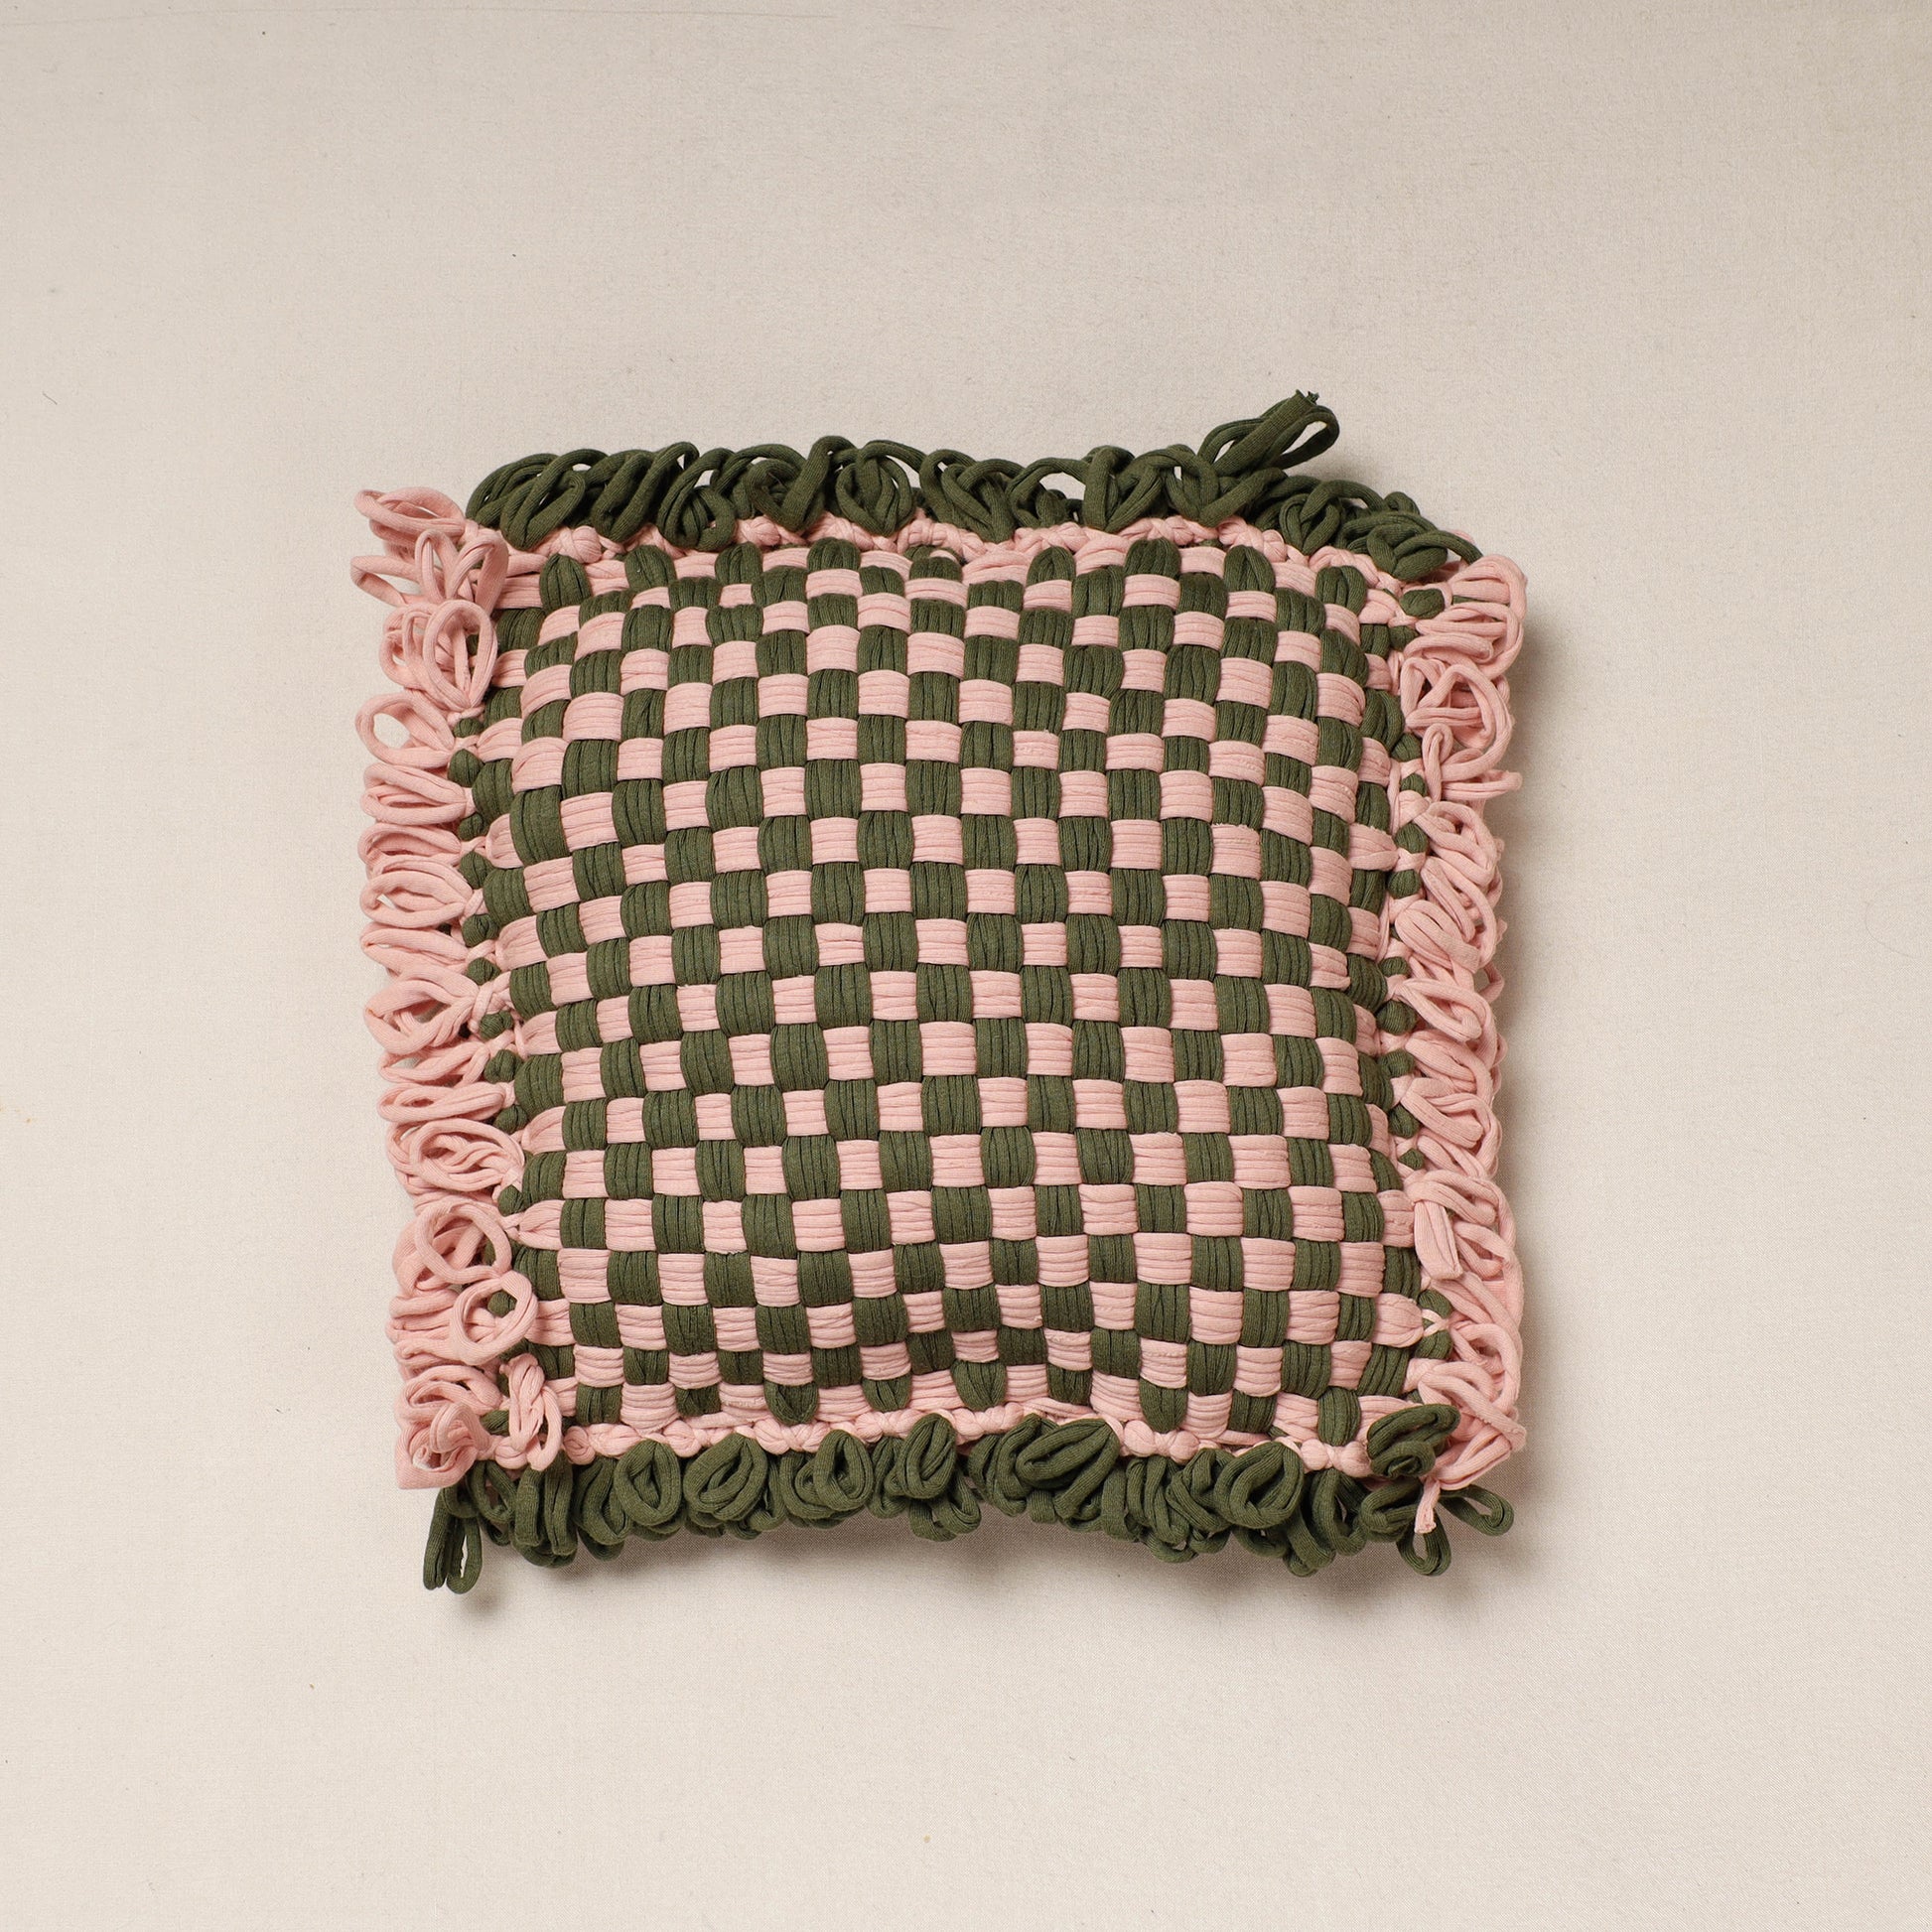 Handwoven Upcycled Cushion Cover